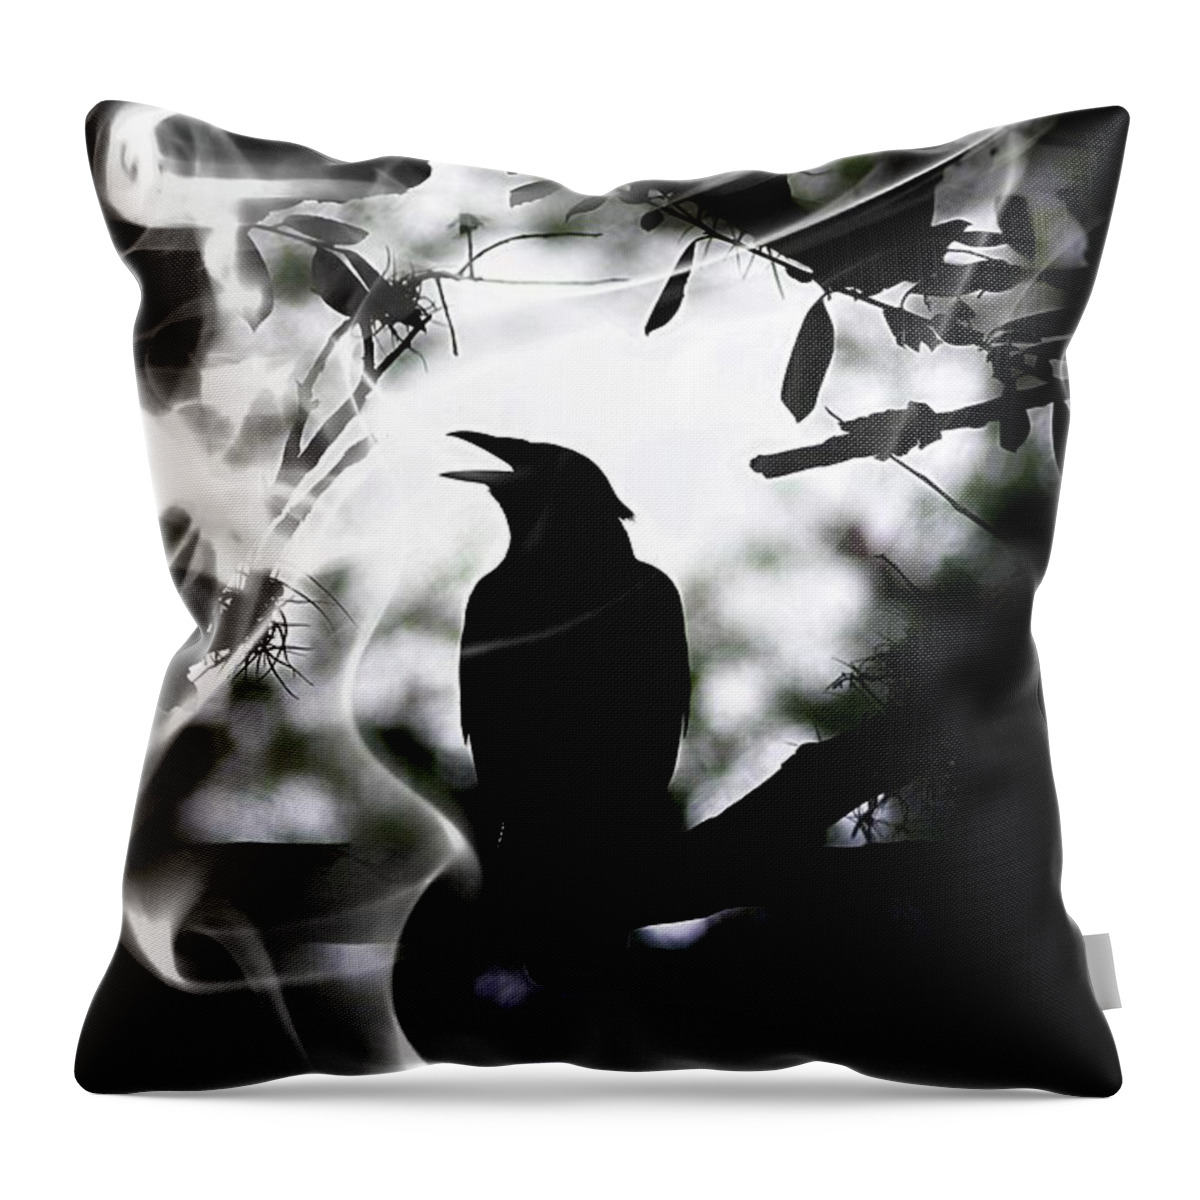 Crow Throw Pillow featuring the photograph Caw by Stoney Lawrentz